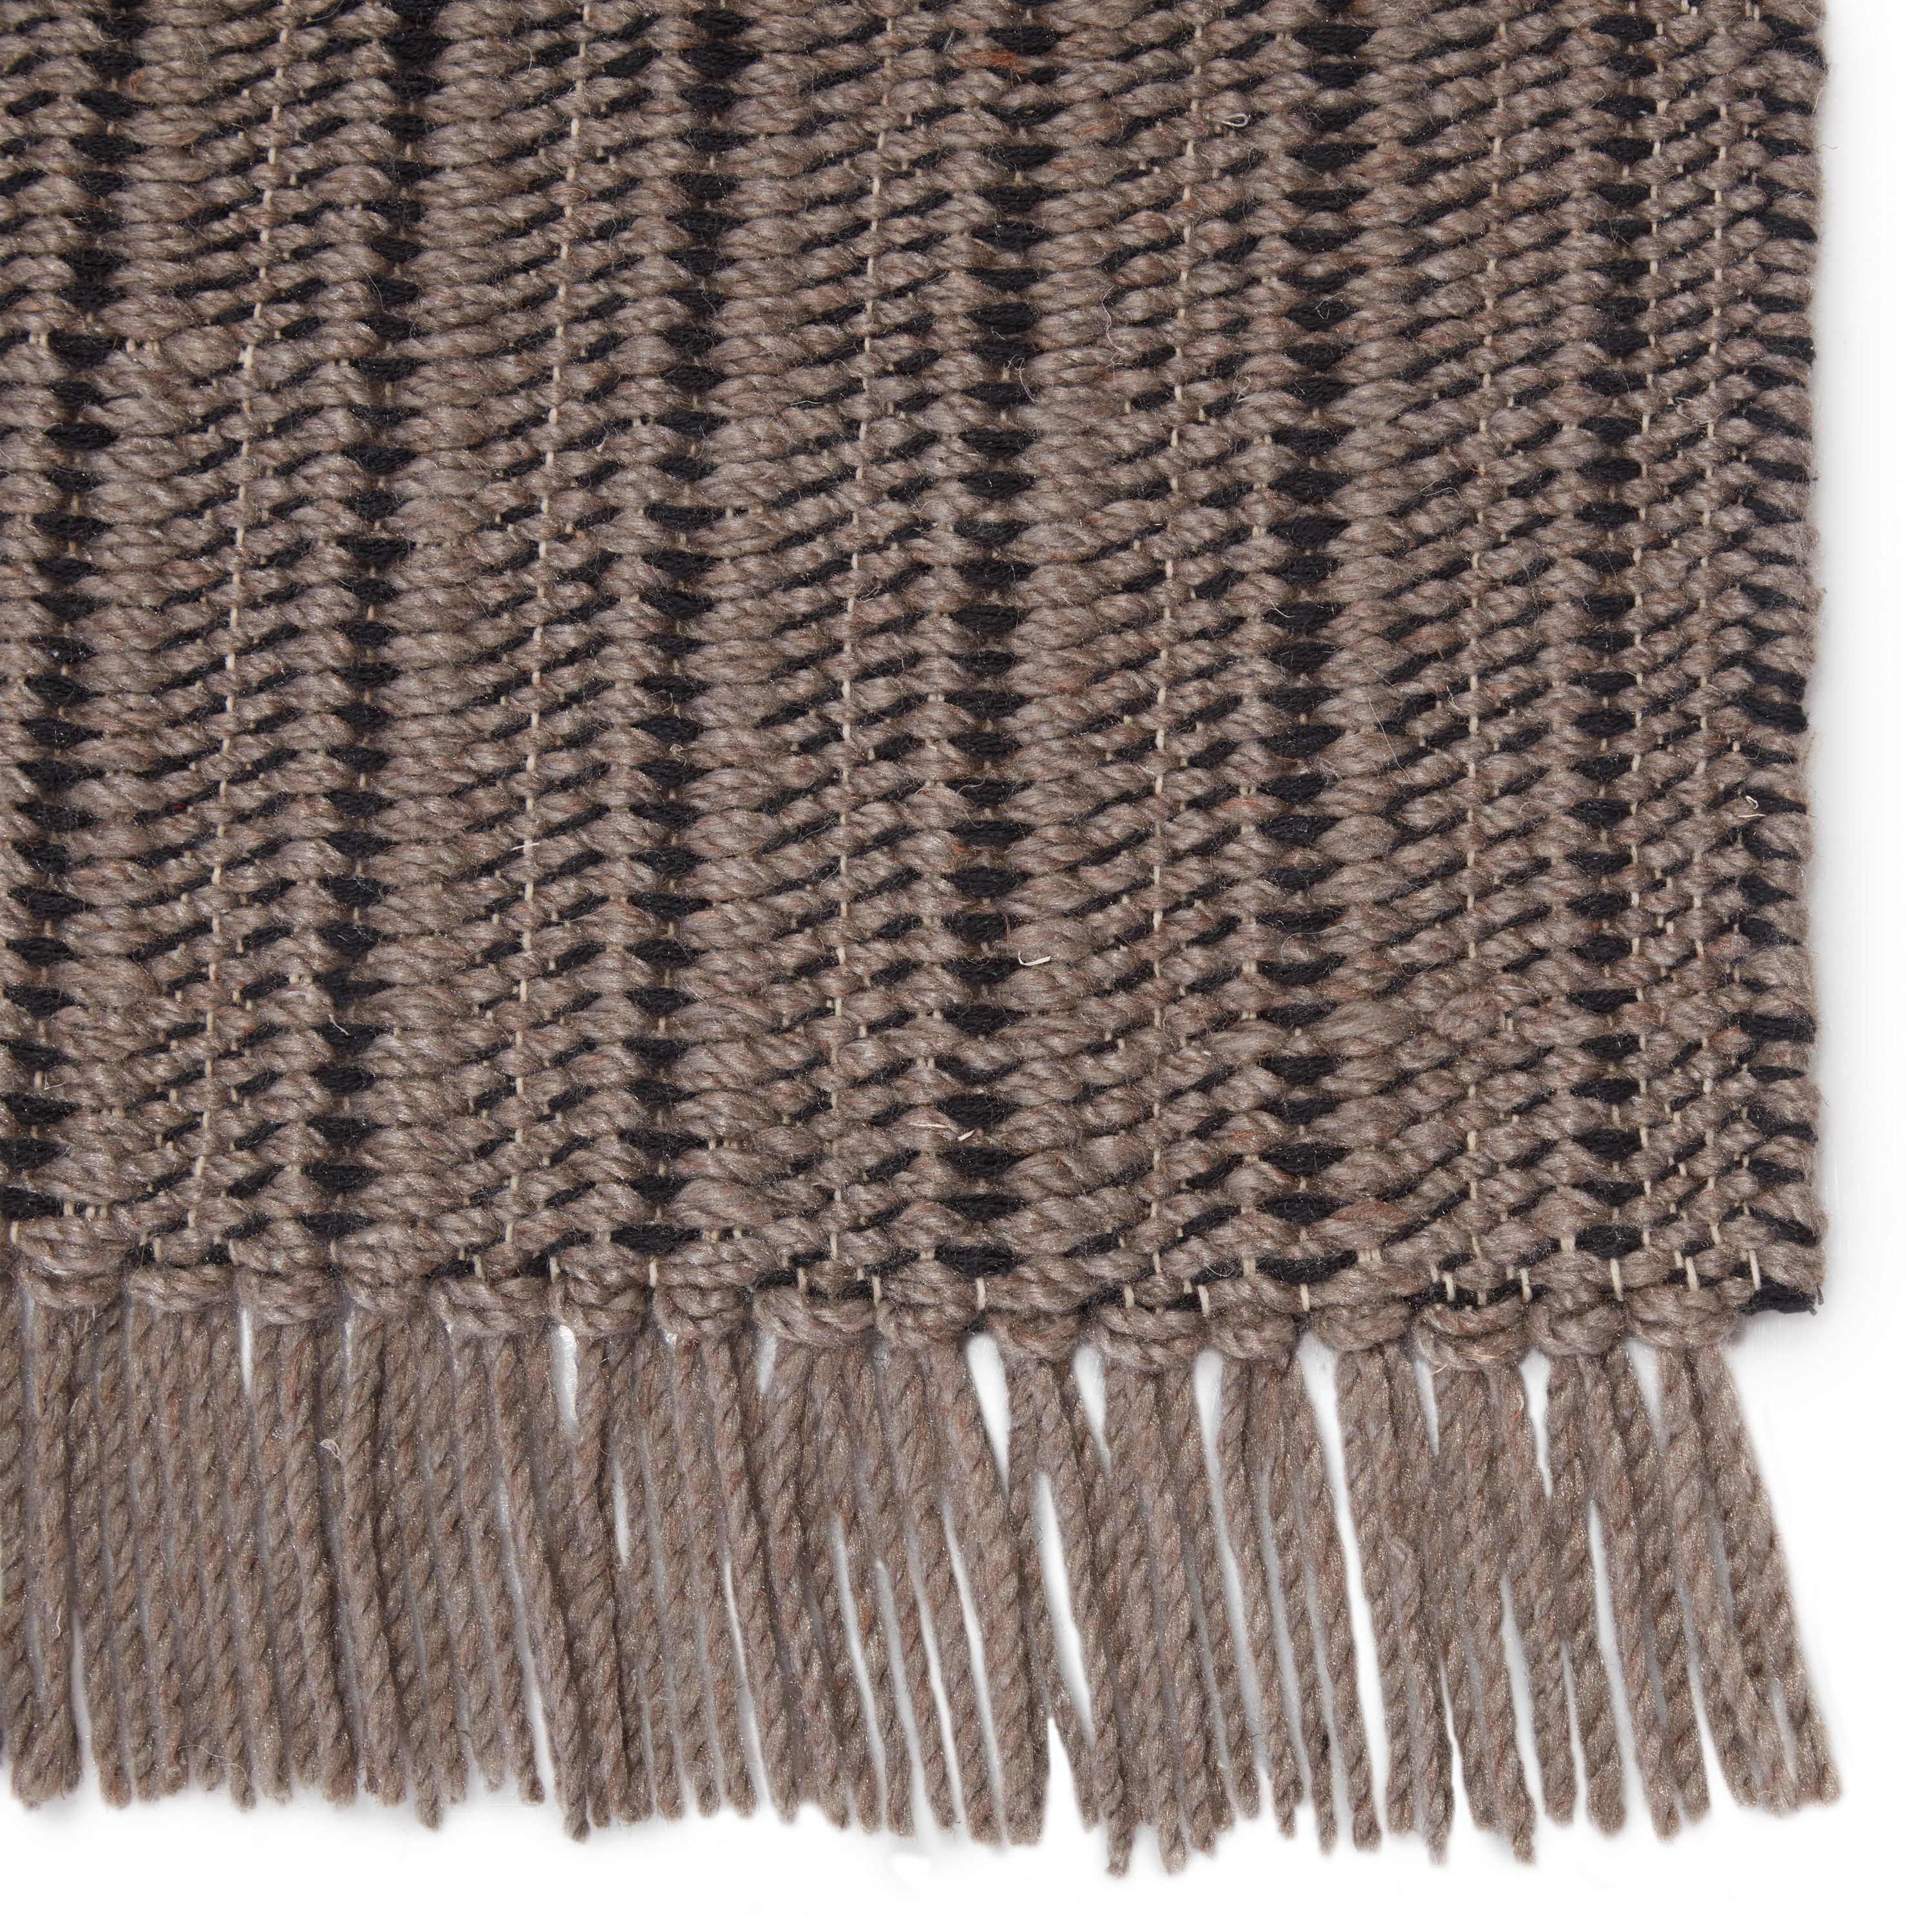 Poise Handwoven Solid Gray/ Black Area Rug (8'X10') - Image 3